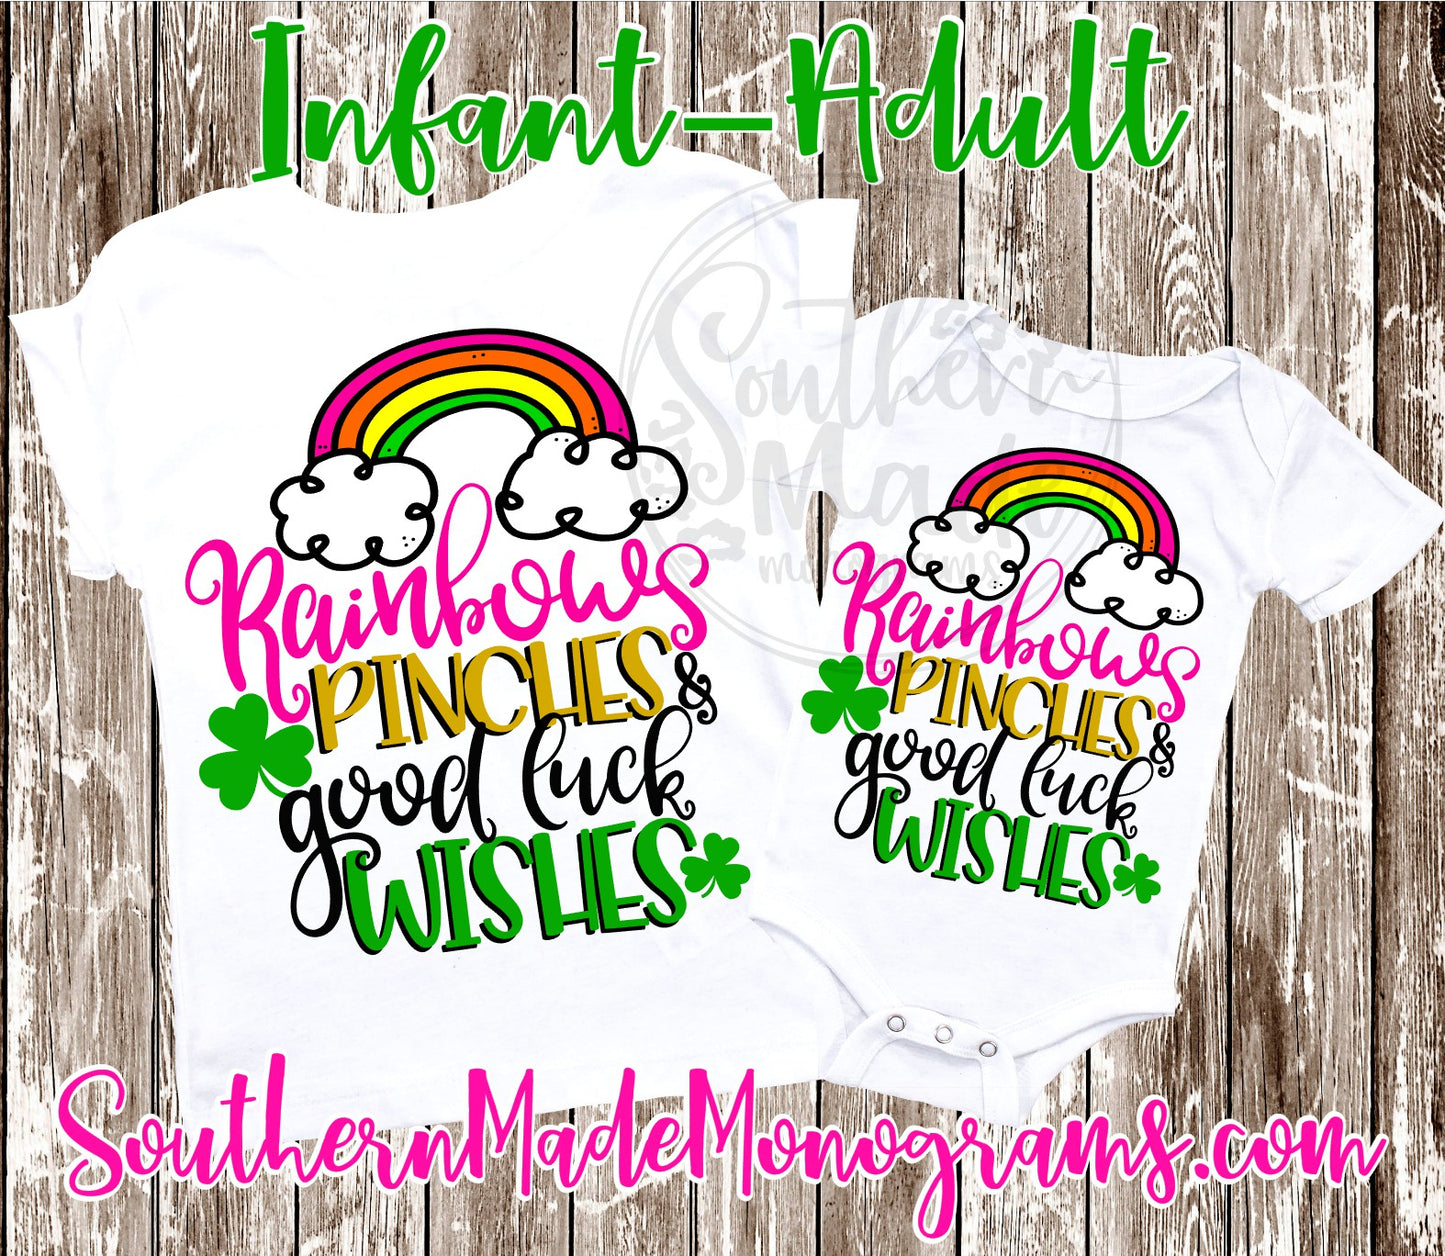 Rainbows Pinches & Good Luck Wishes